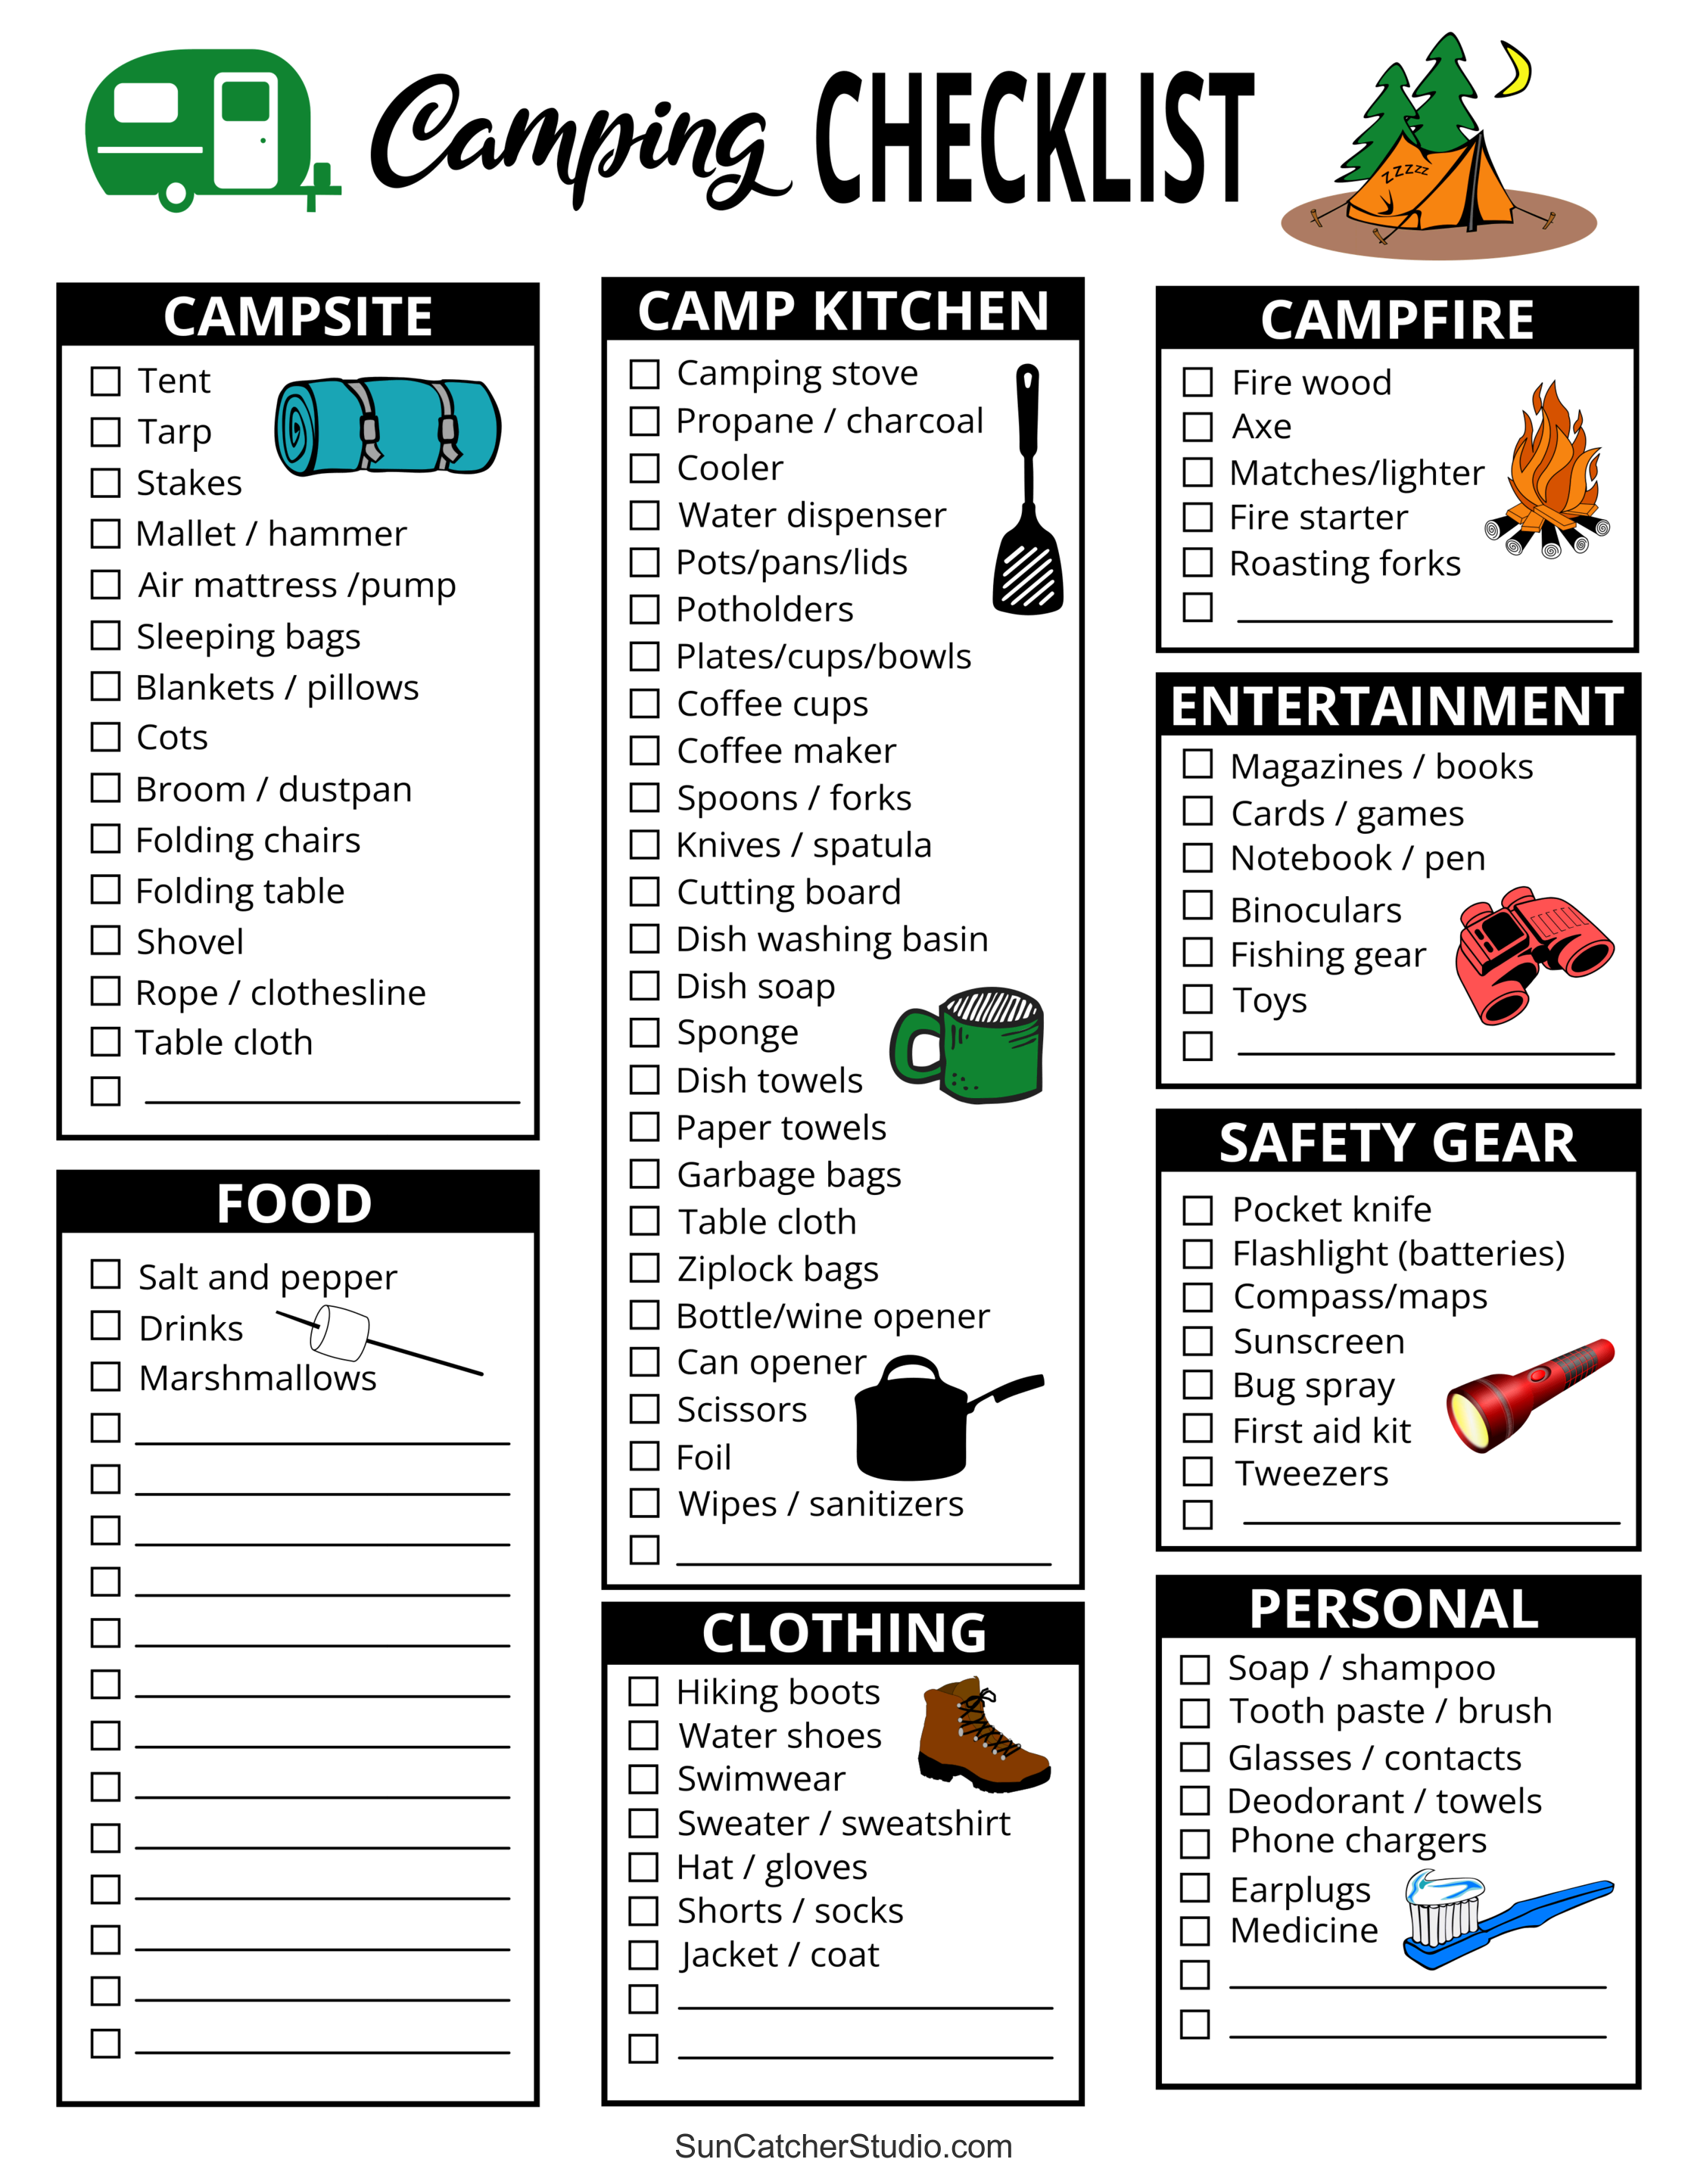 Camping Checklist (Camping Essentials & Meals) – DIY Projects, Patterns ...